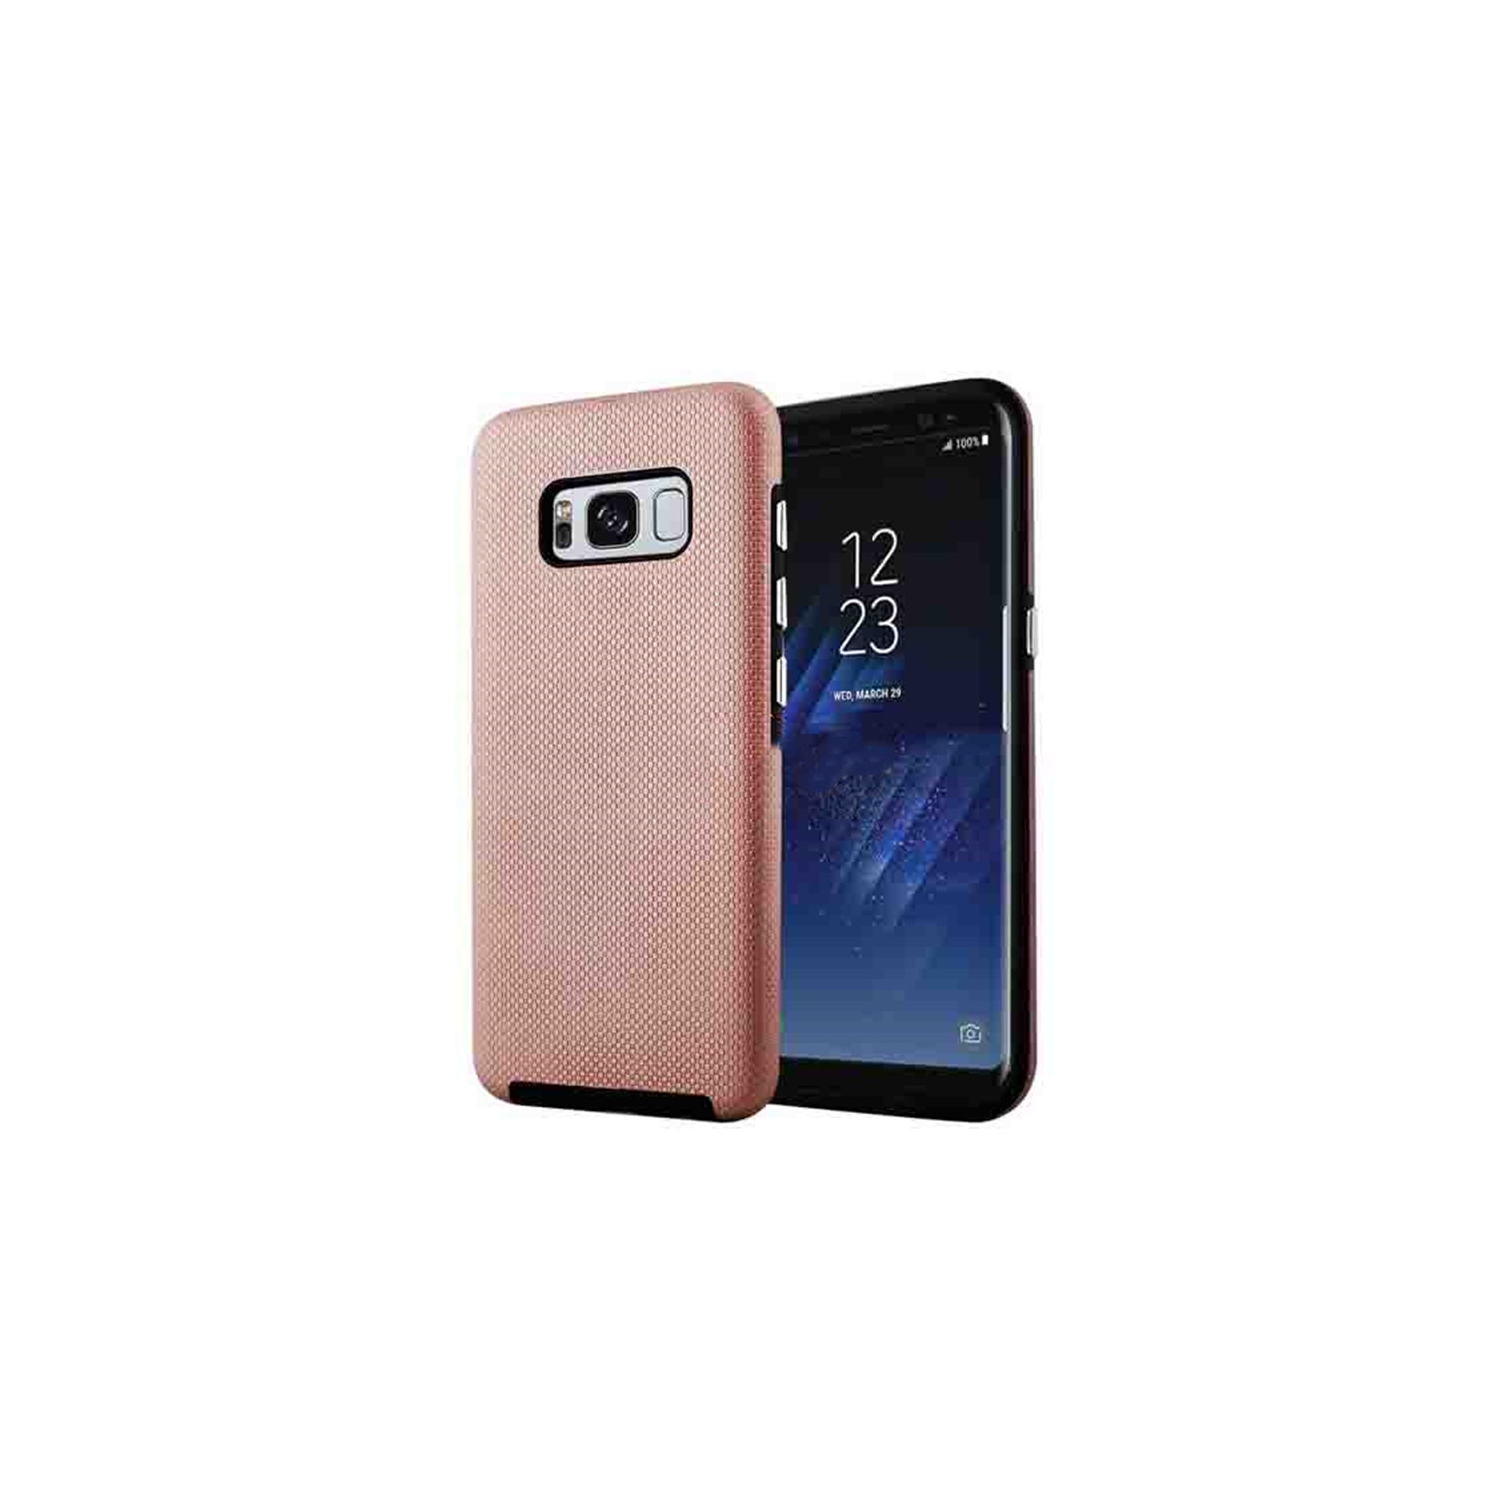 【CSmart】 Slim Fitted Hybrid Hard PC Shell Shockproof Scratch Resistant Case Cover for Samsung Galaxy S8 Plus, Rose Gold